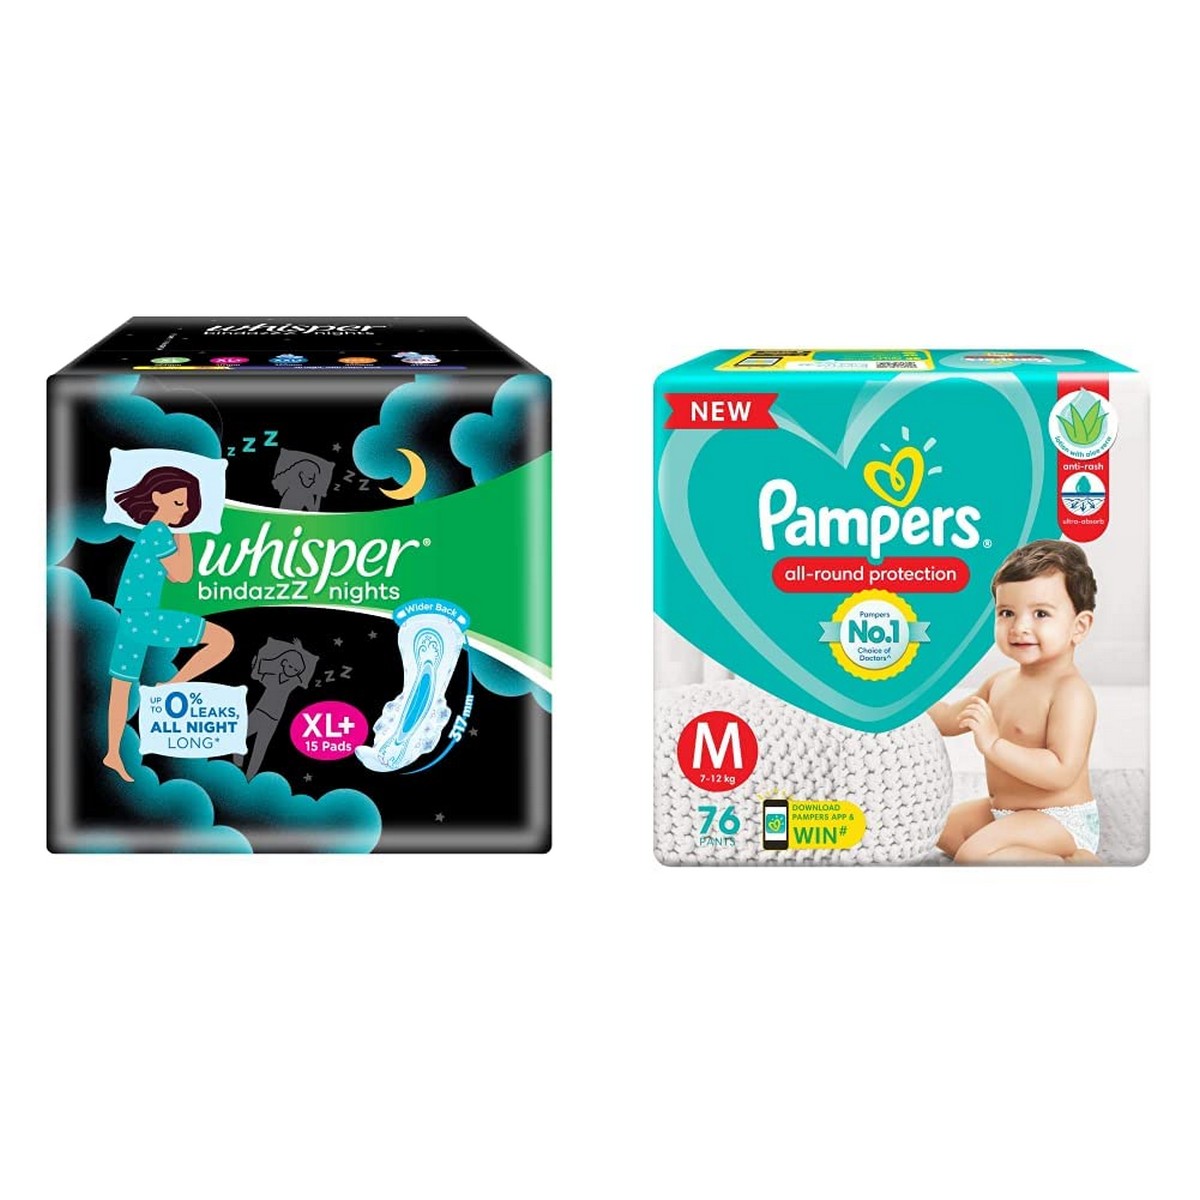 Whisper Ultra Overnight Sanitary Pads With Wings – XL+ (15 Pieces) And  Pampers New Diapers Pants, Medium (76 Count)